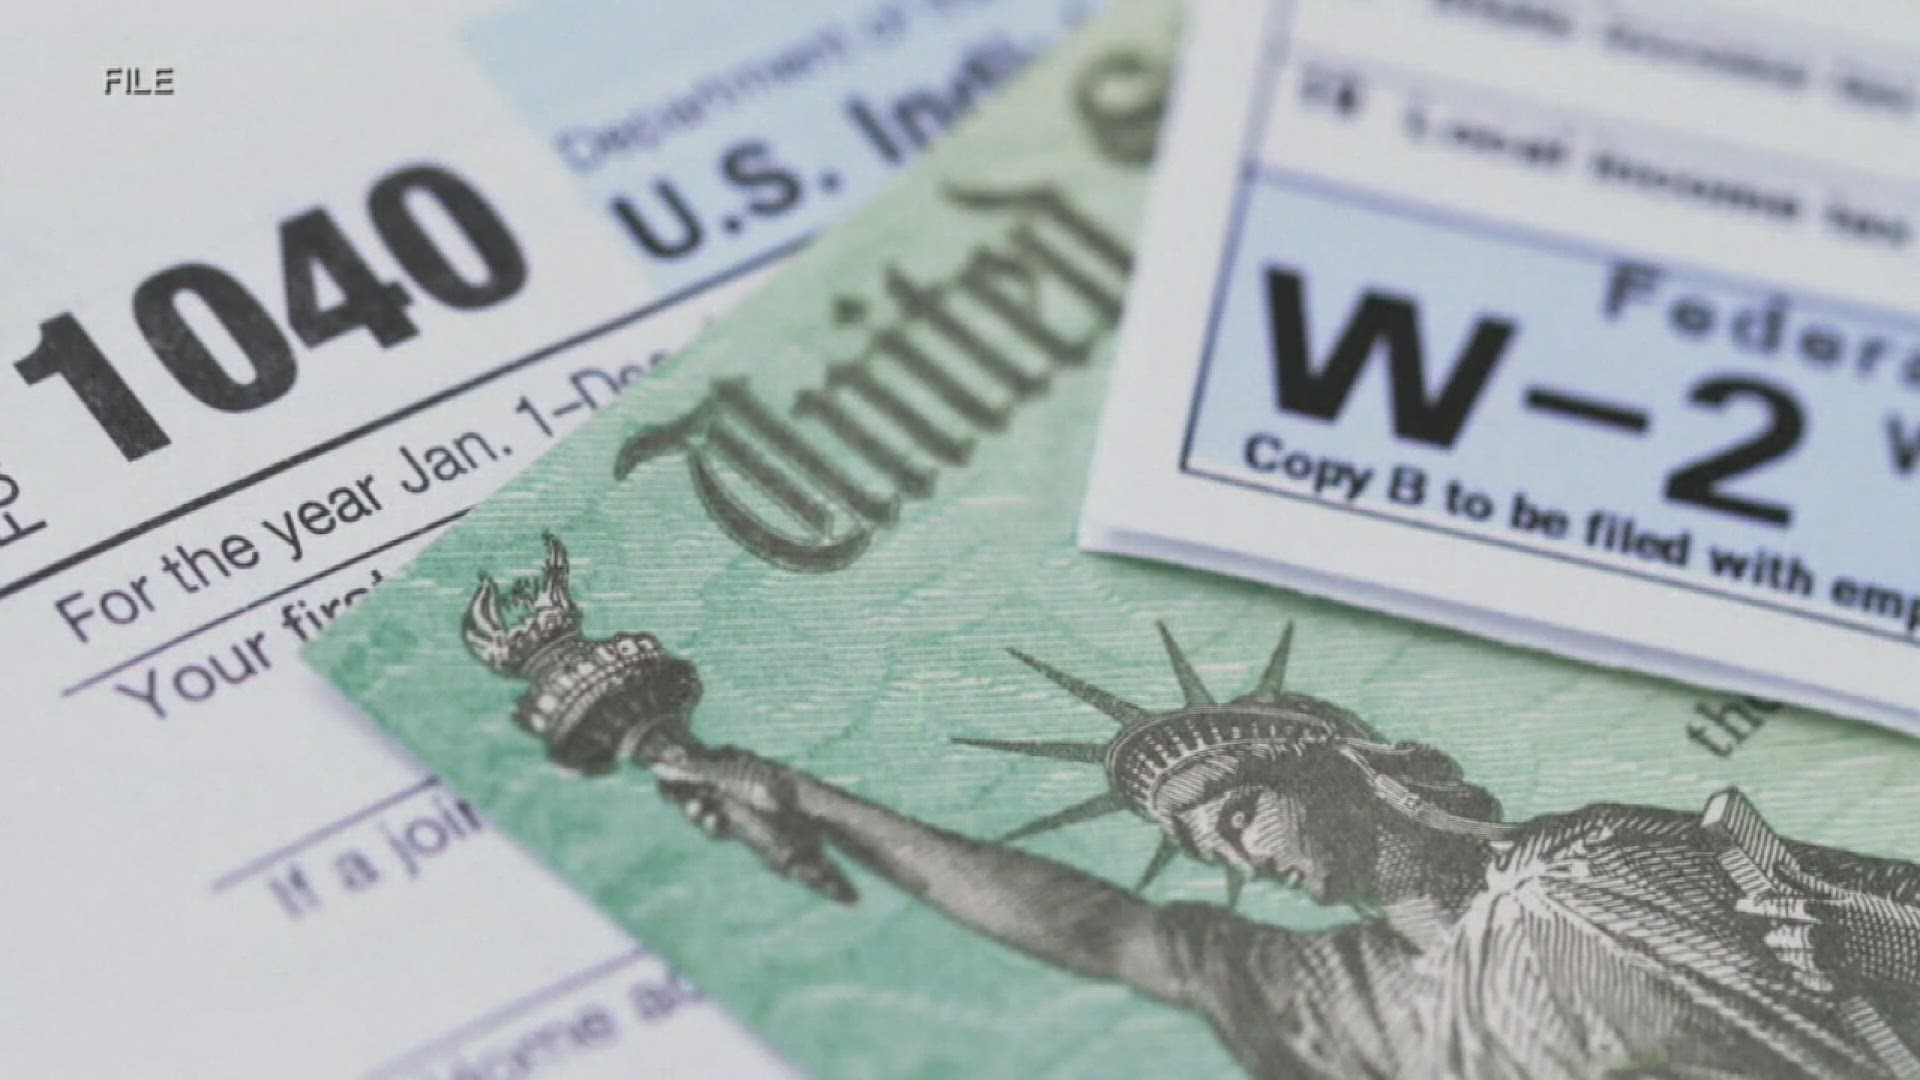 NewsWest 9 spoke with Rodrick Benton, Assistant Special Agent for the IRS Criminal Investigation on what to look out for when doing your taxes